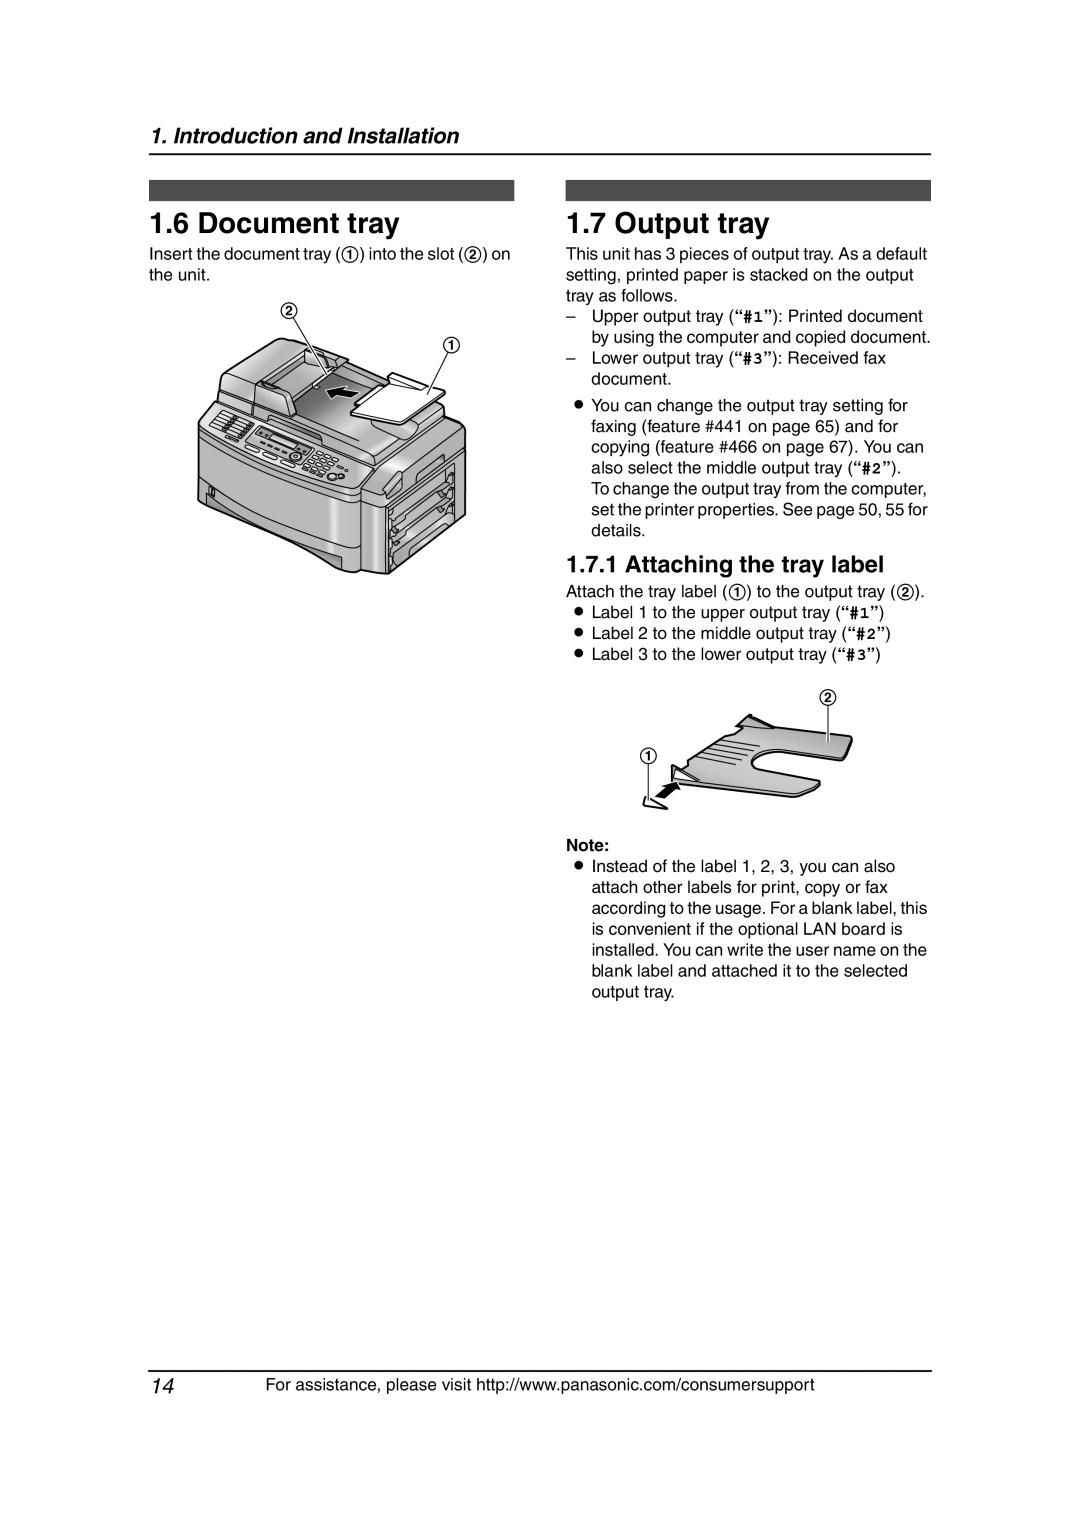 Panasonic KX-FLB851 manual Document tray, Output tray, Attaching the tray label, Introduction and Installation 